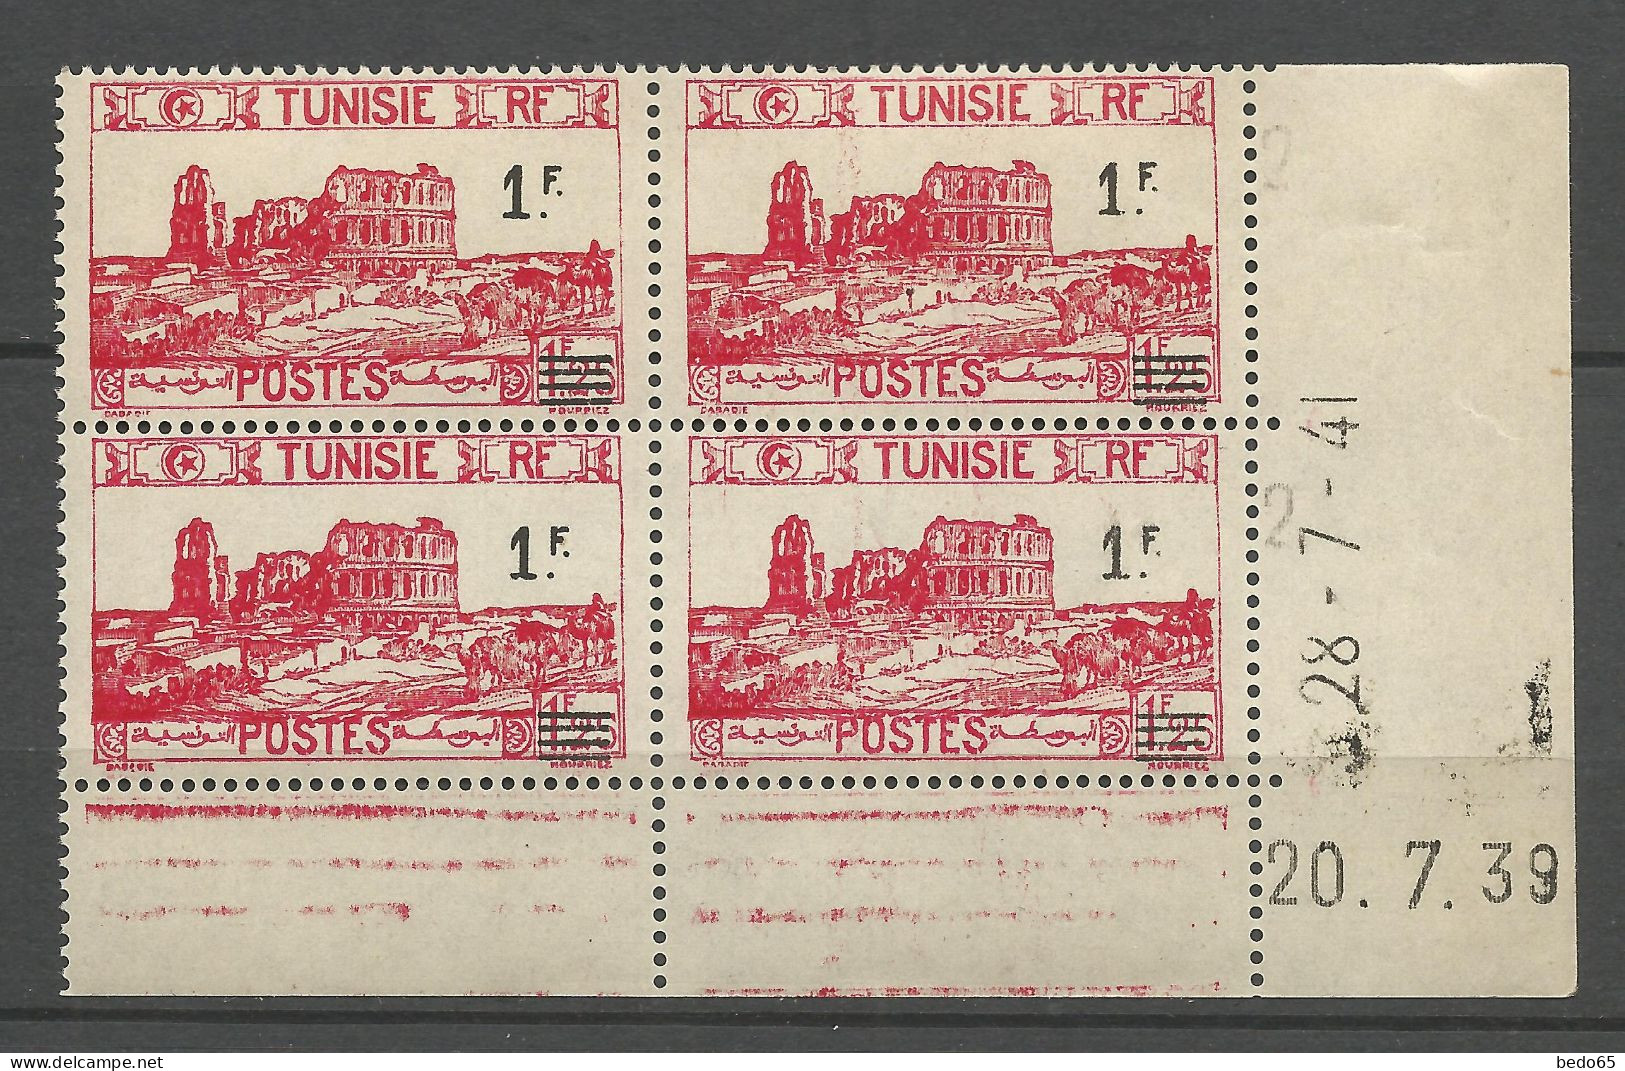 TUNISIE N° 224 Coin Daté 28.7.41 Surcharge Recto Verso NEUF**  SANS CHARNIERE / Hingeless / MNH - Nuovi